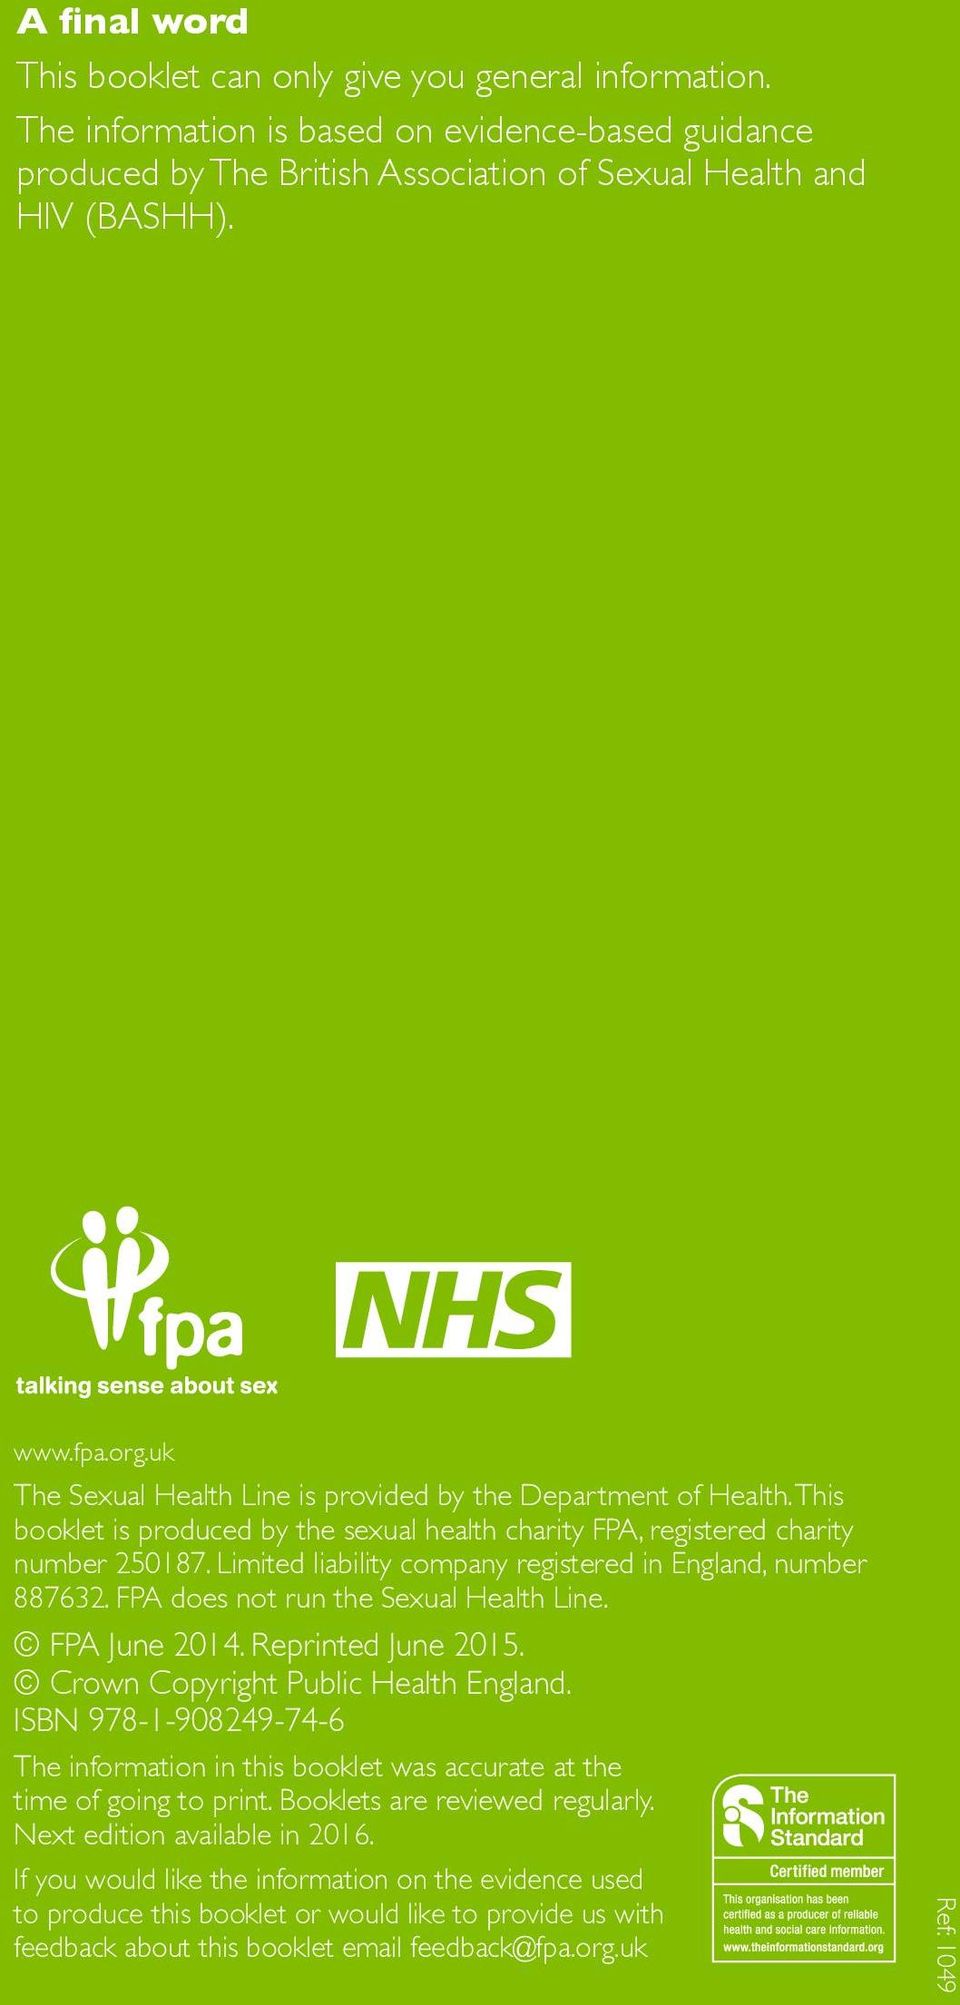 Limited liability company registered in England, number 887632. FPA does not run the Sexual Health Line. FPA June 2014. Reprinted June 2015. Crown Copyright Public Health England.